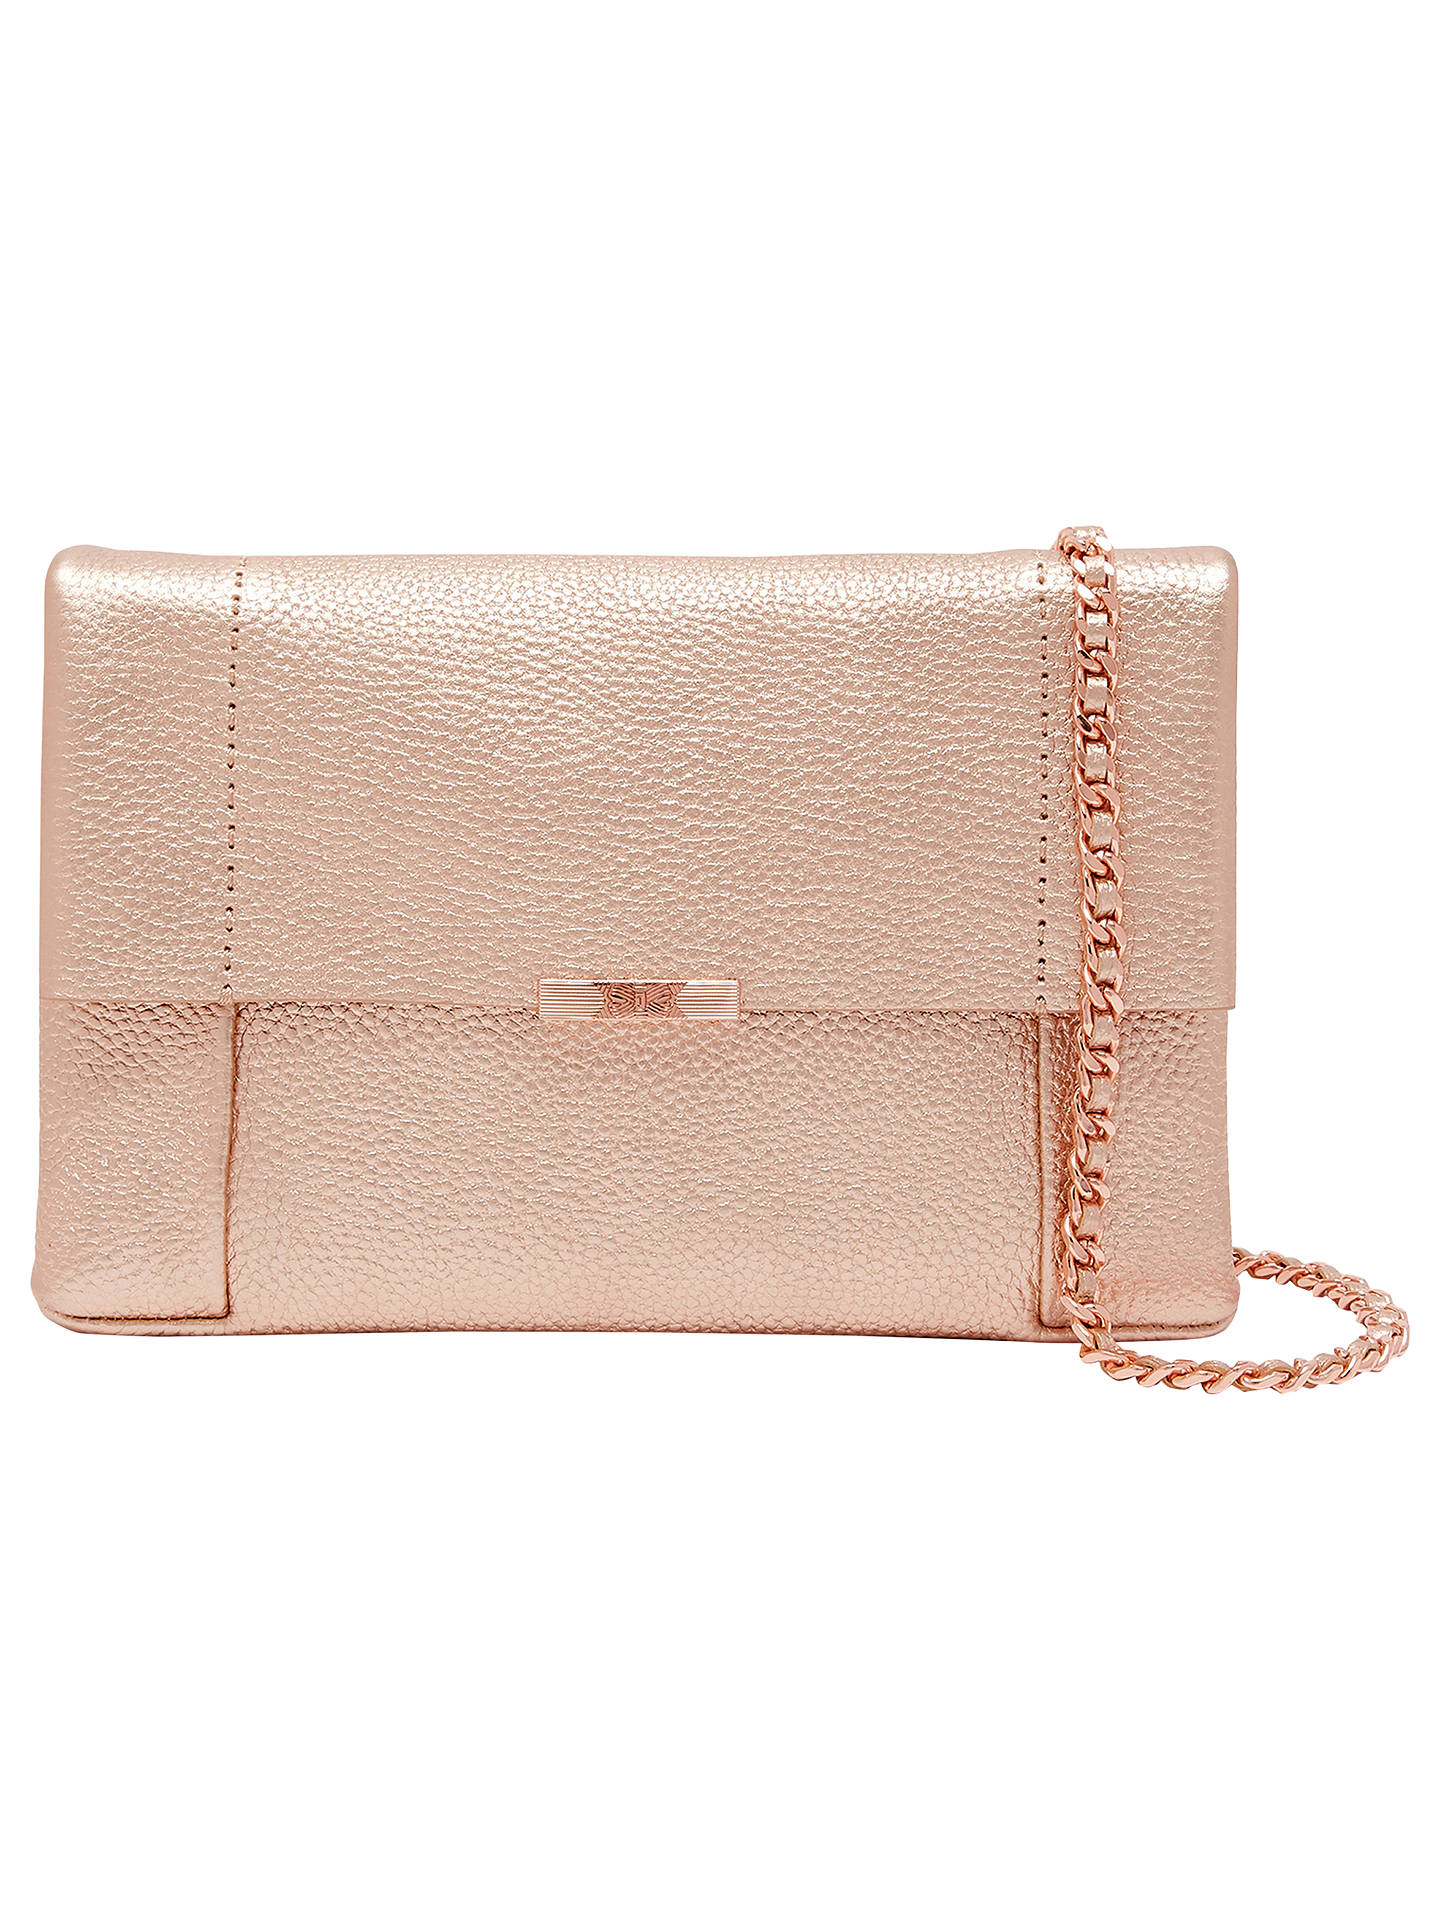 Ted Baker Parson Leather Cross Body Bag at John Lewis & Partners